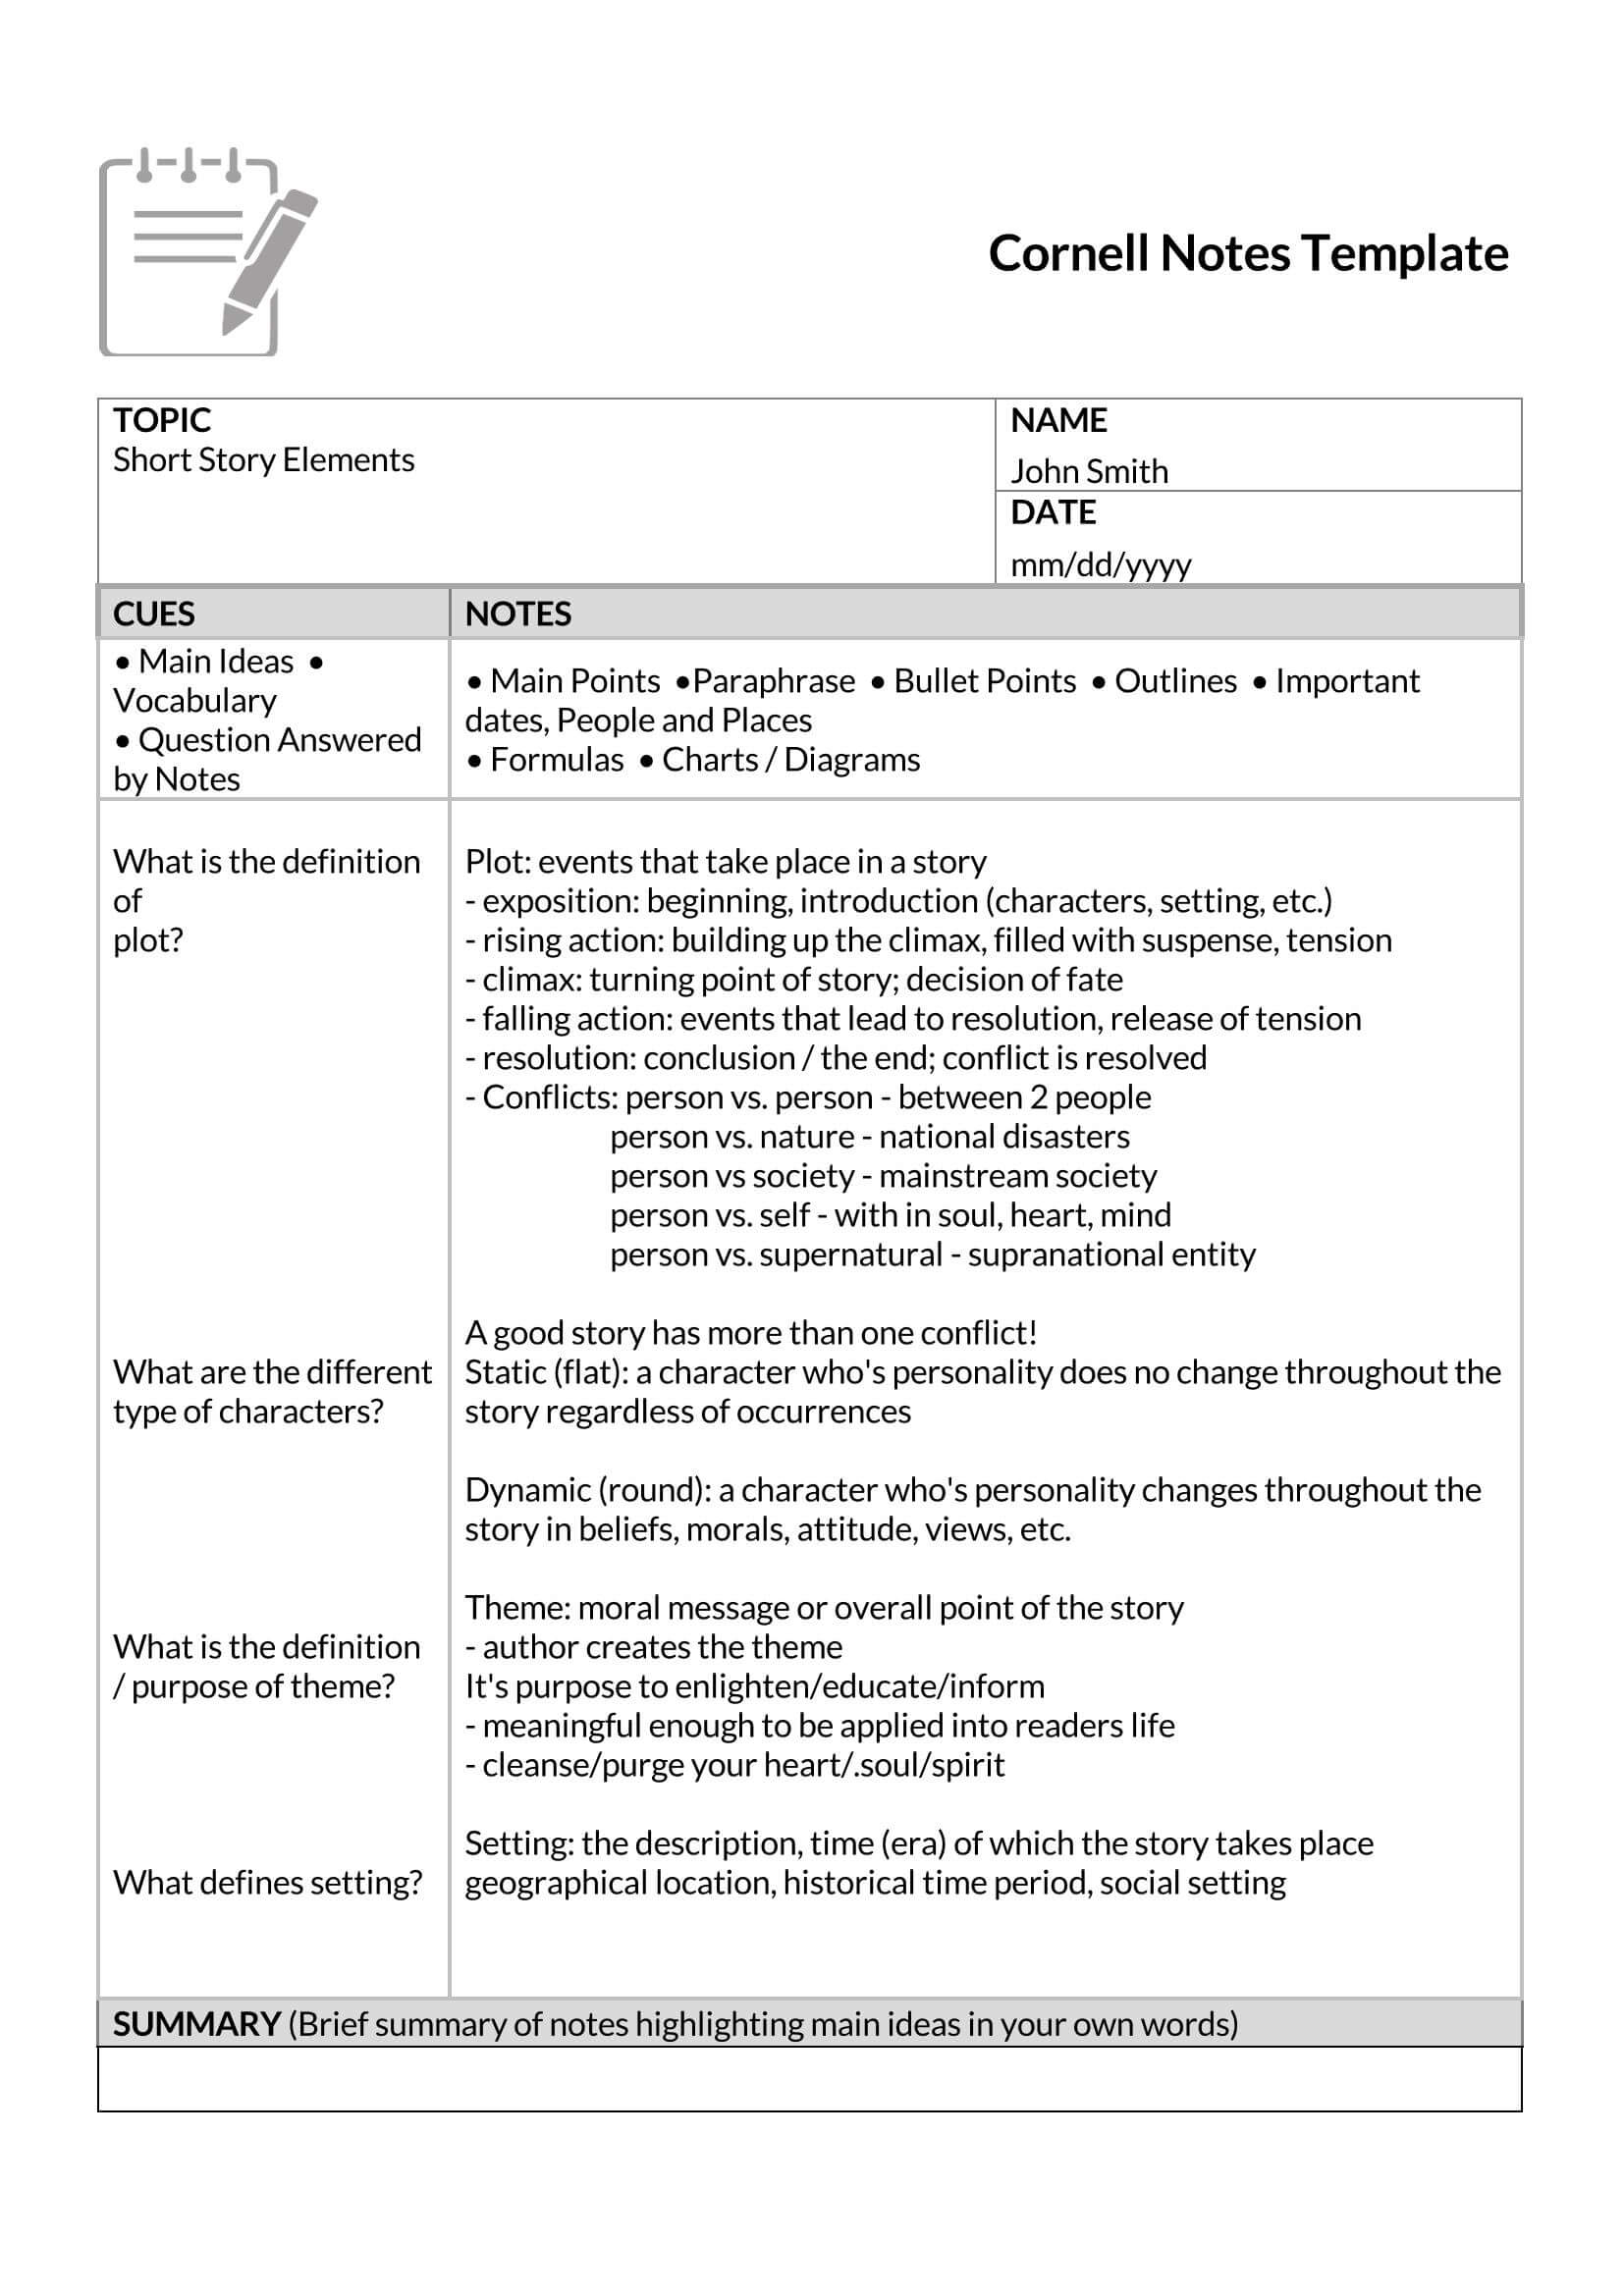 Customizable Cornell Note Sample Download